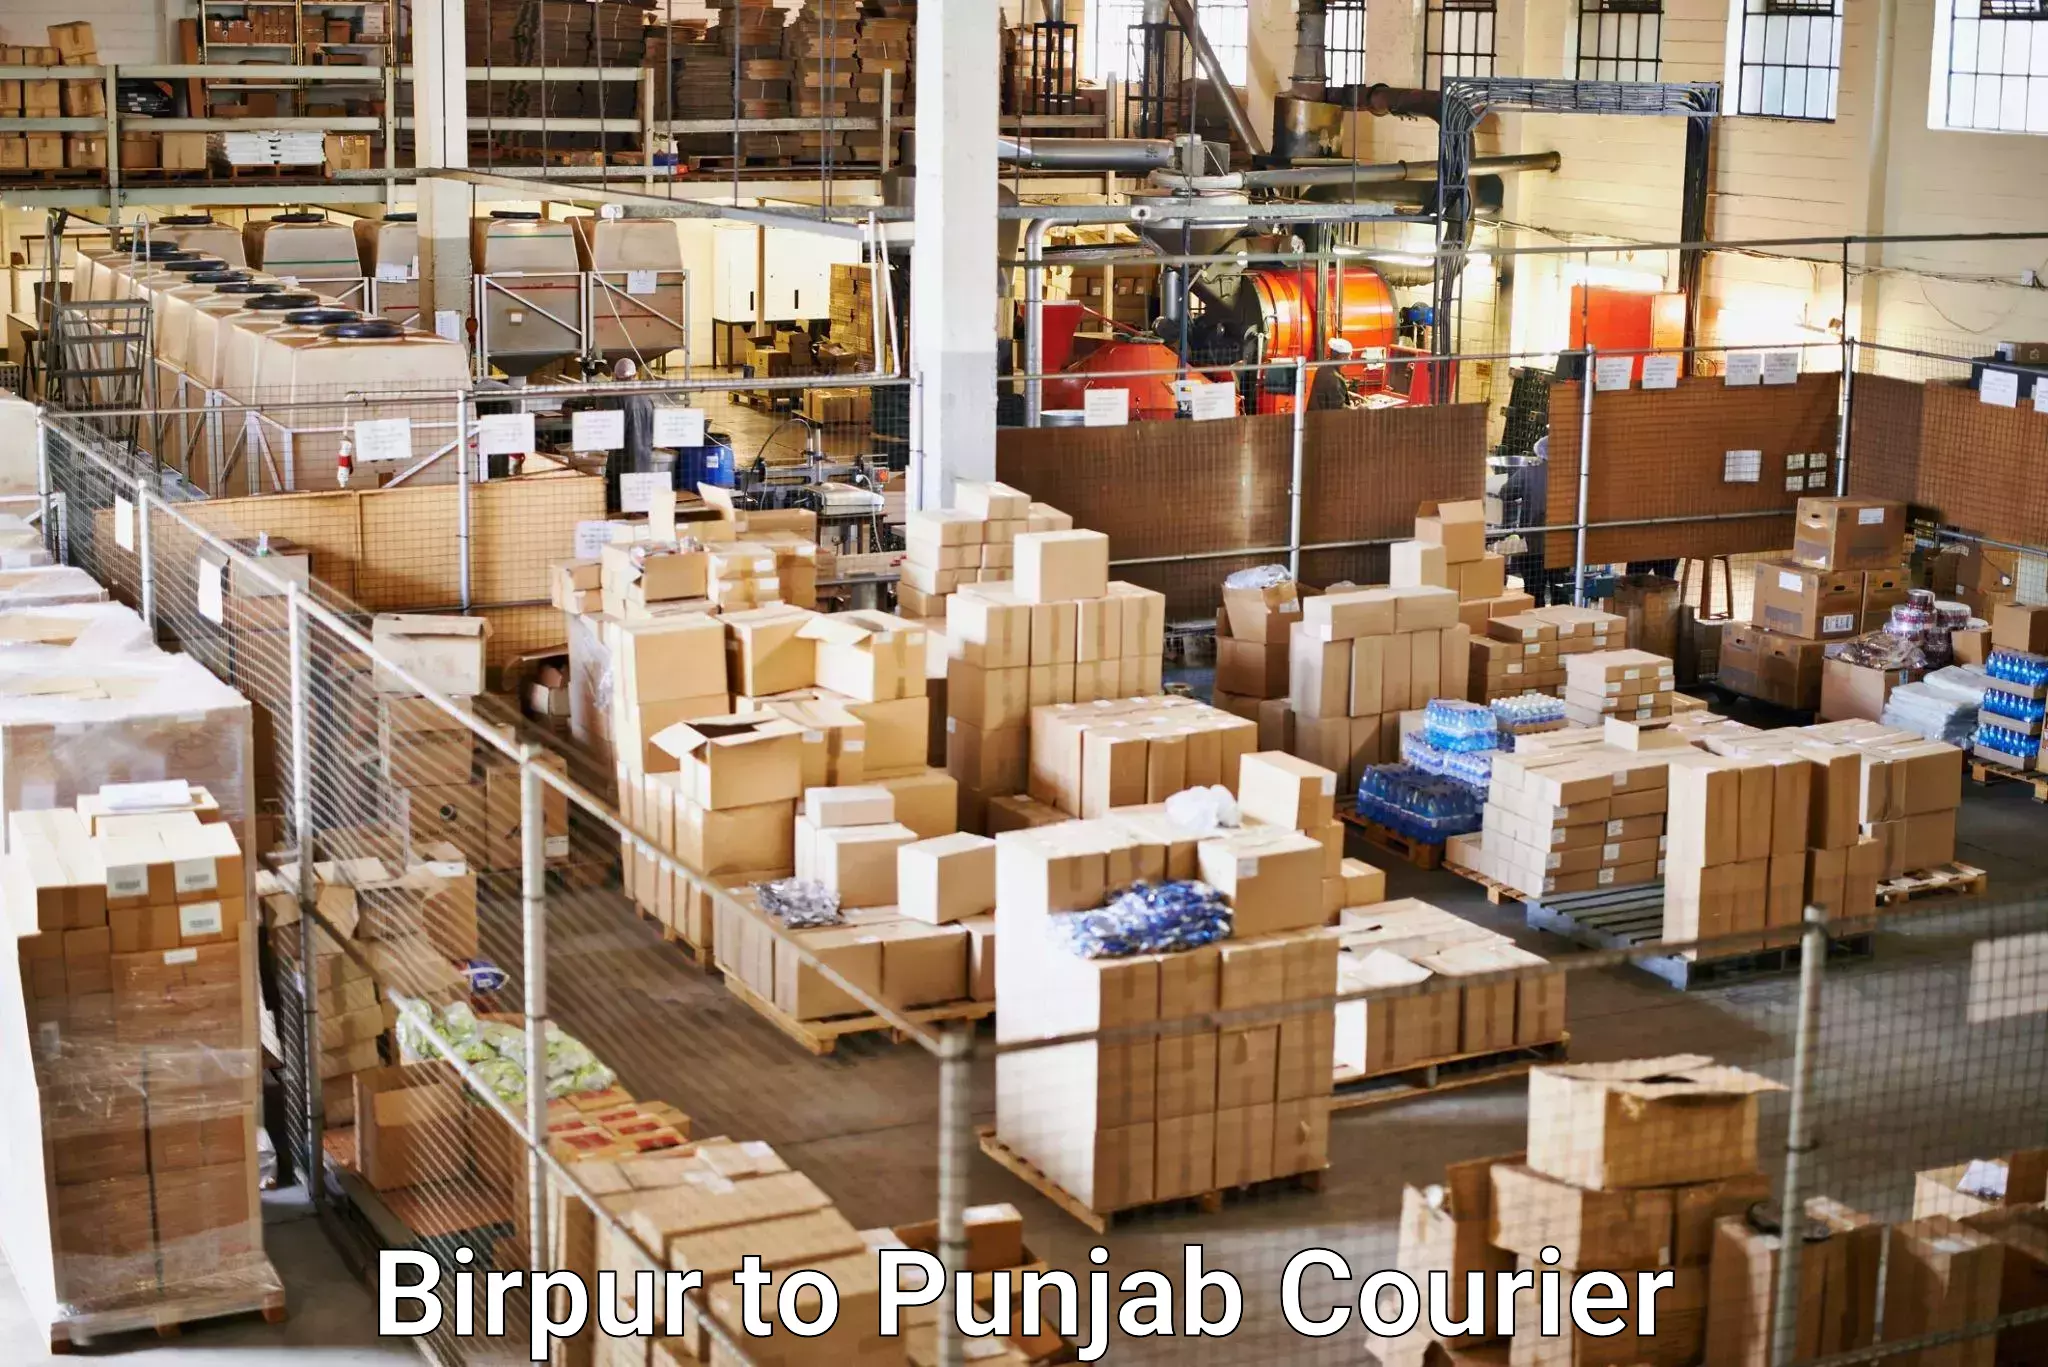 Parcel service for businesses Birpur to Mohali